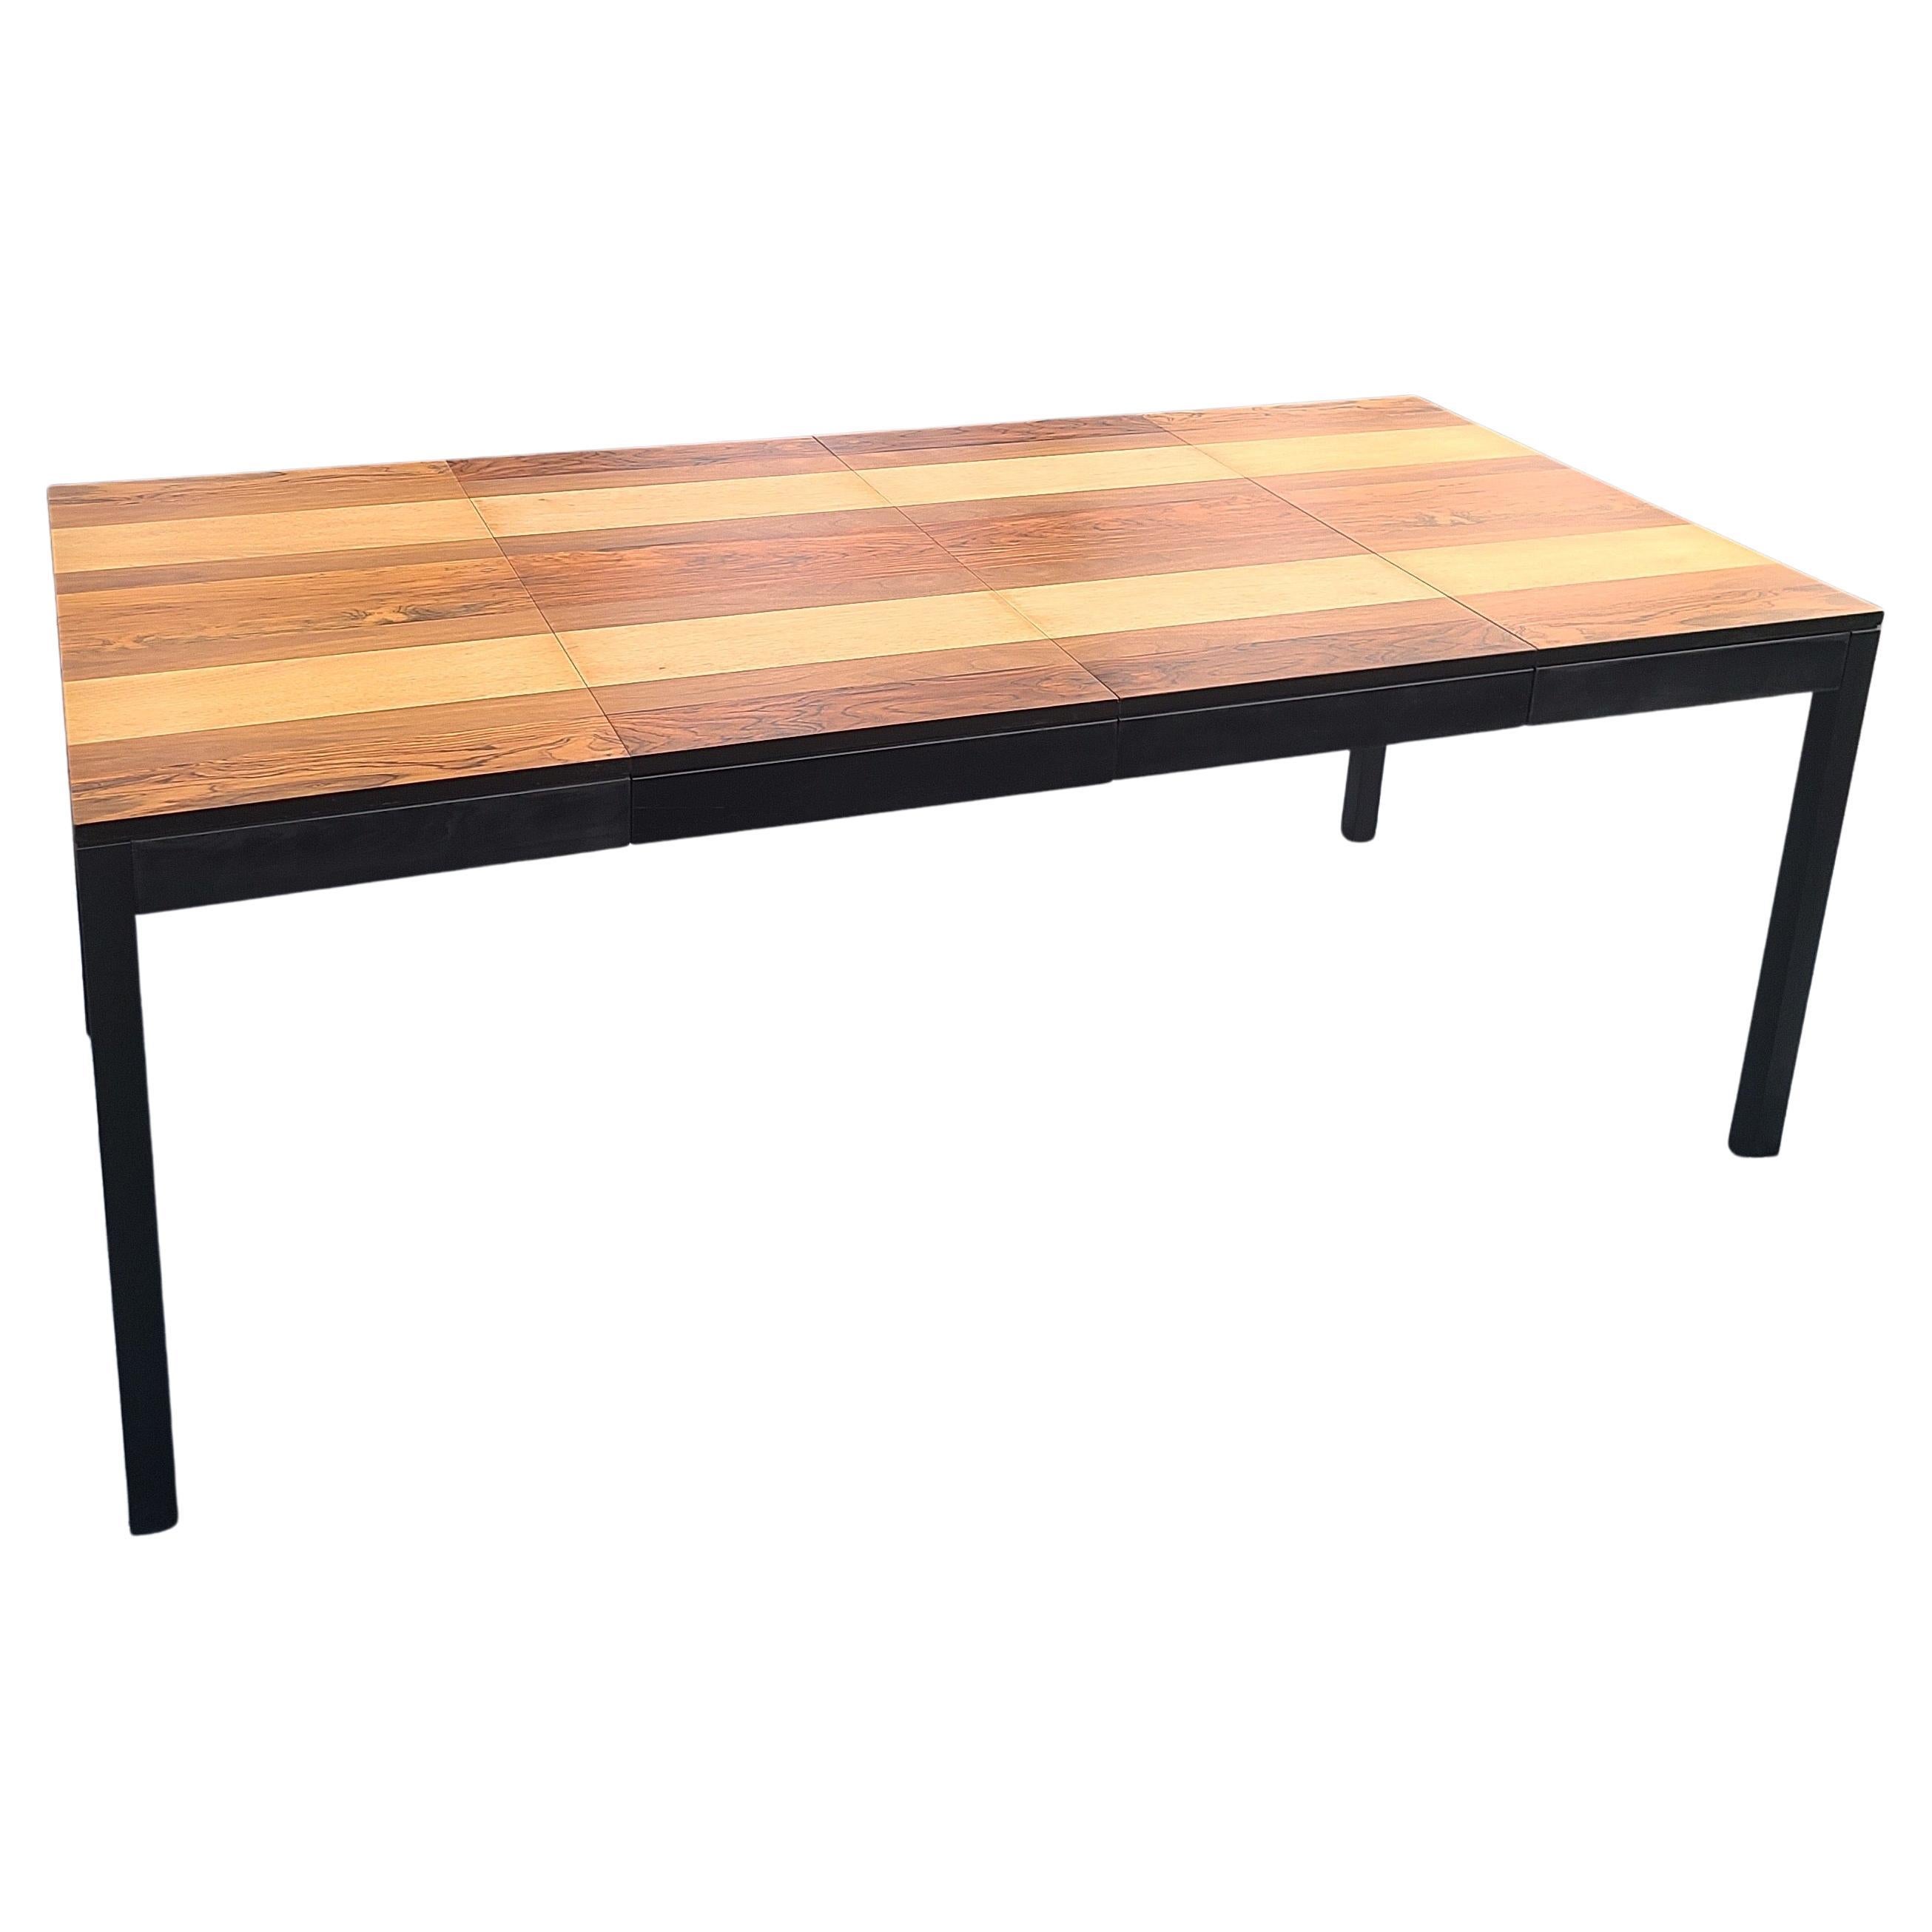 Mid-20th Century Milo Baughman Dining Table for Directional